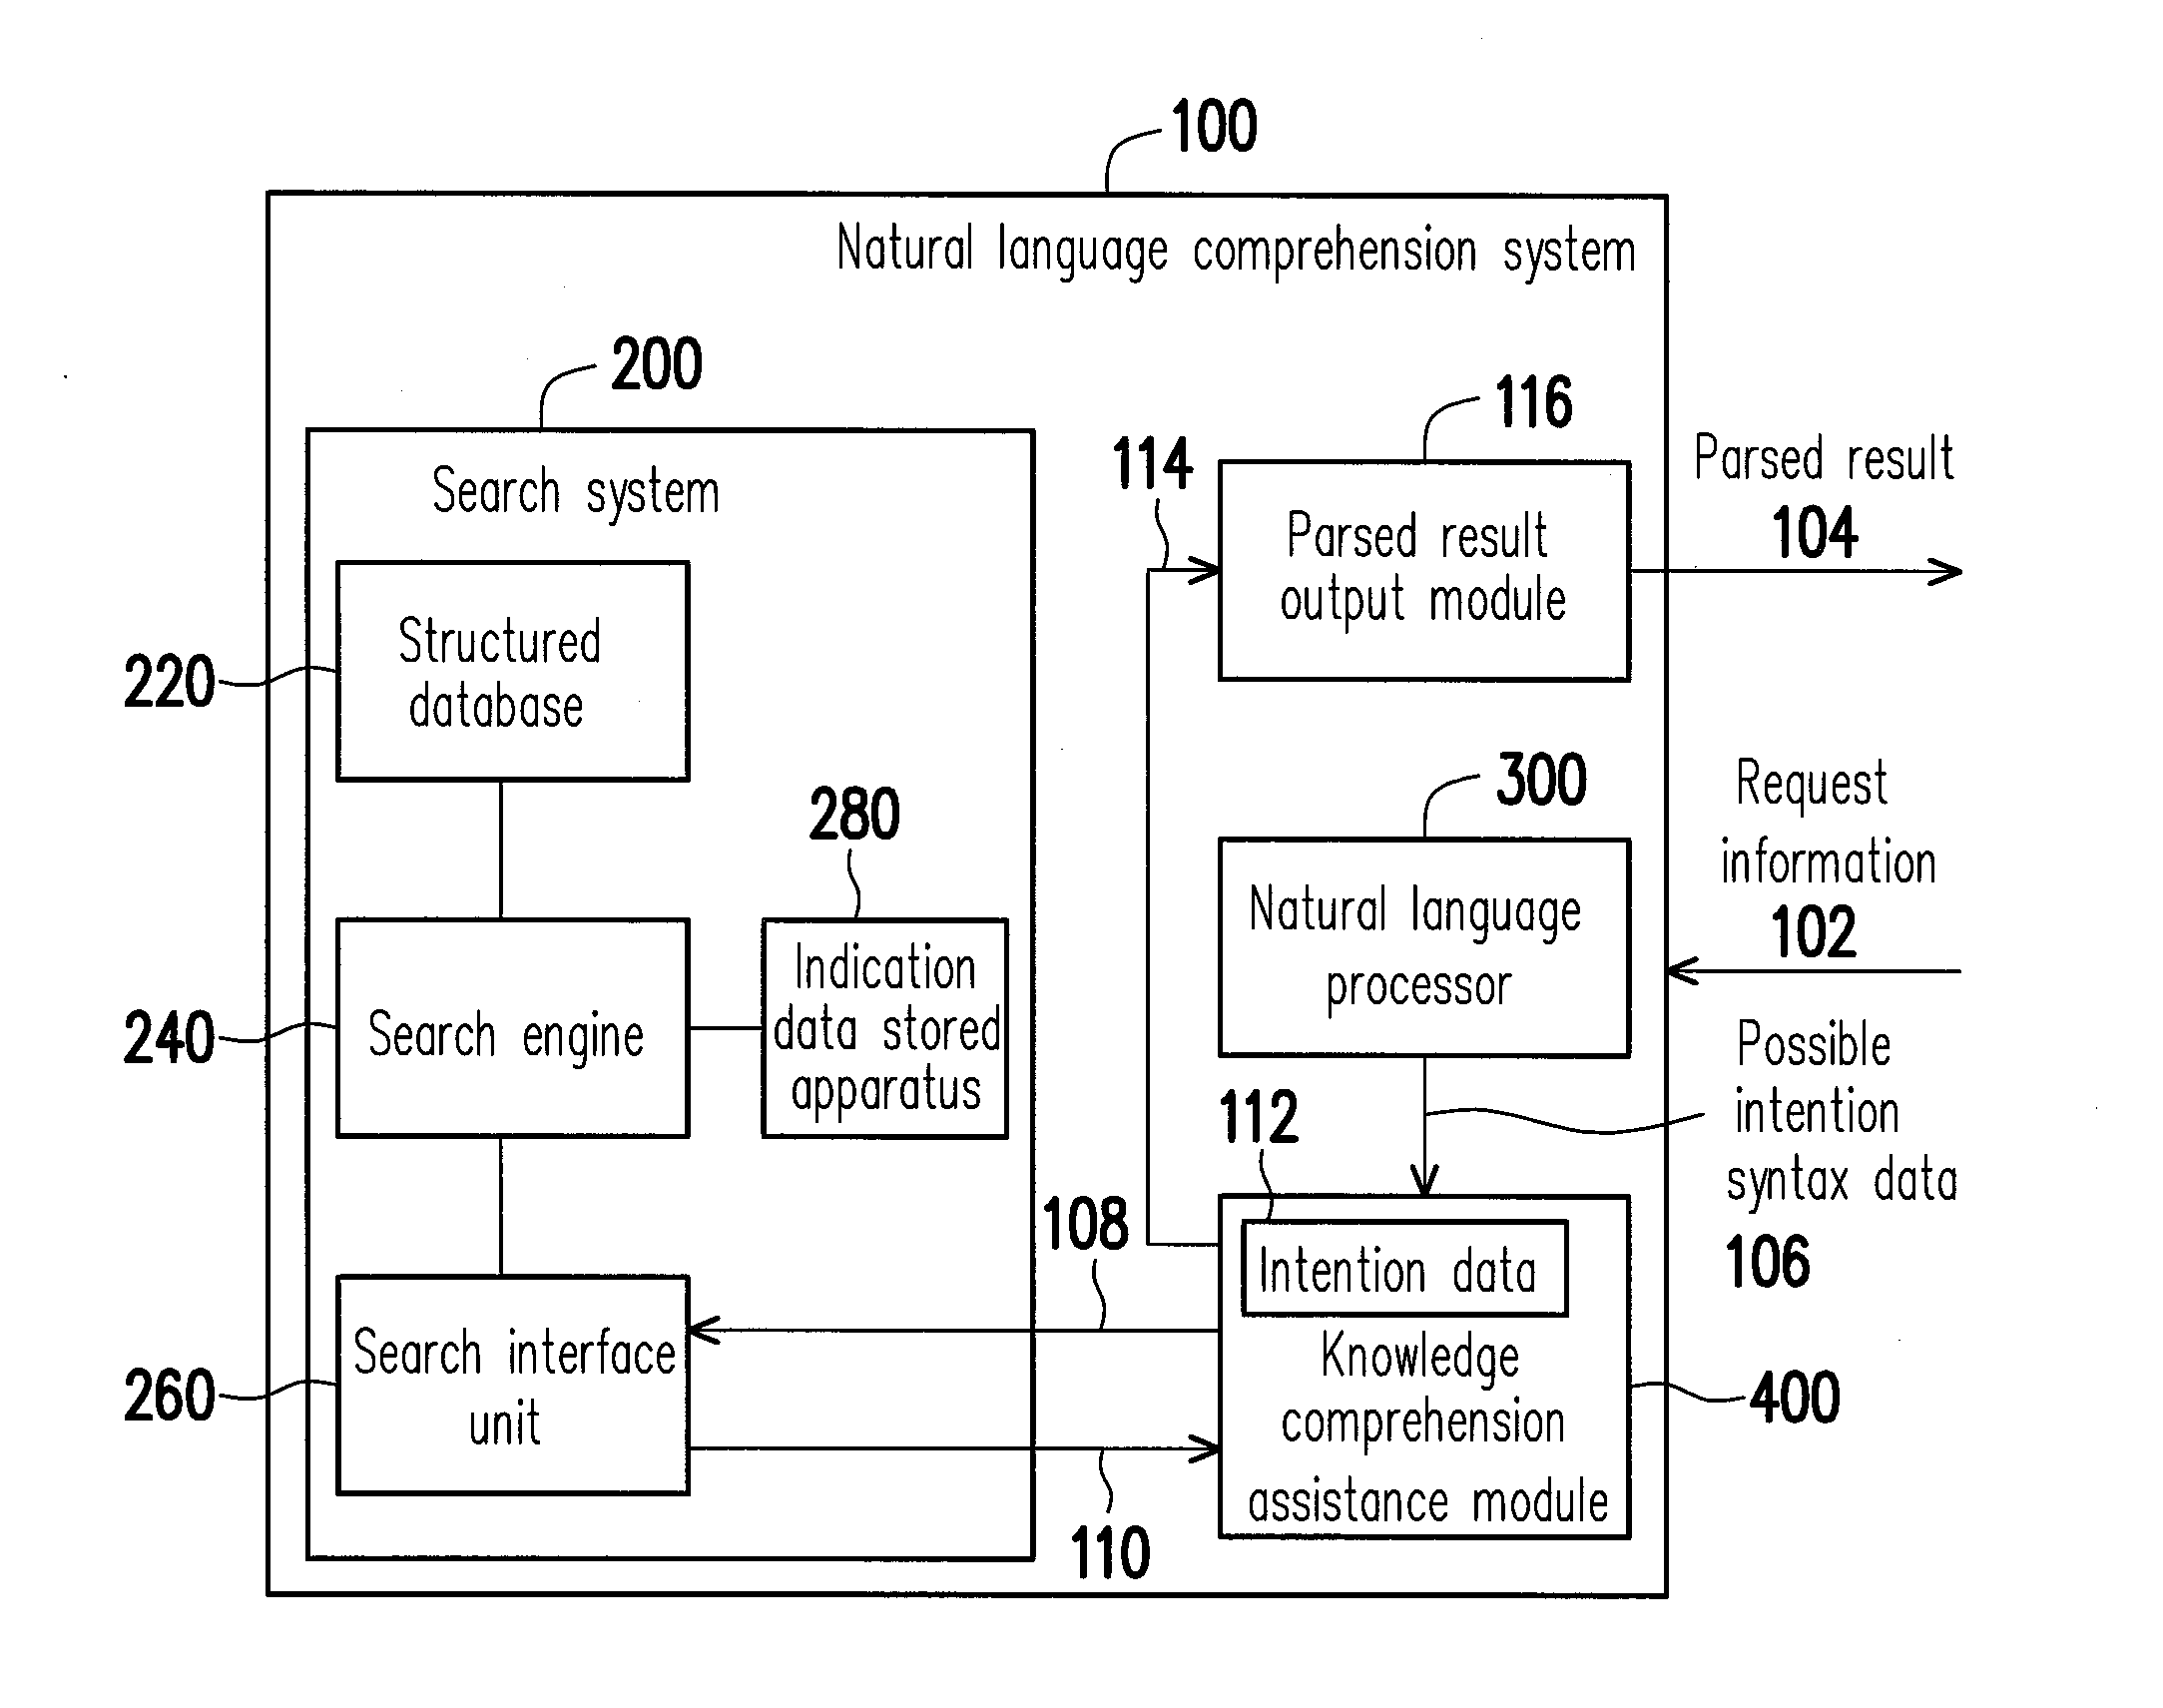 Method for correcting a speech response and natural language dialogue system